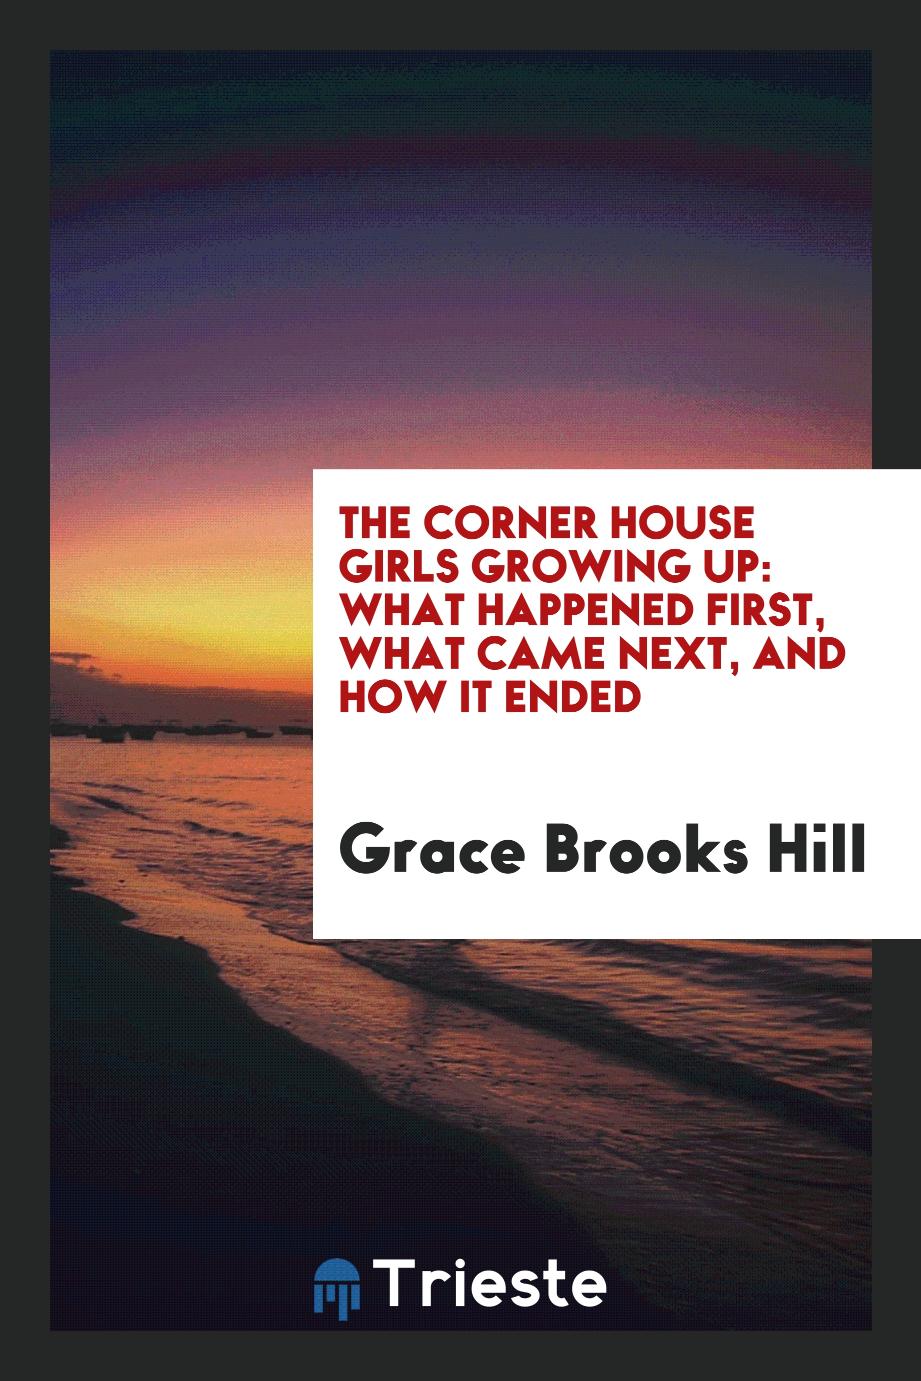 The corner house girls growing up: what happened first, what came next, and how it ended